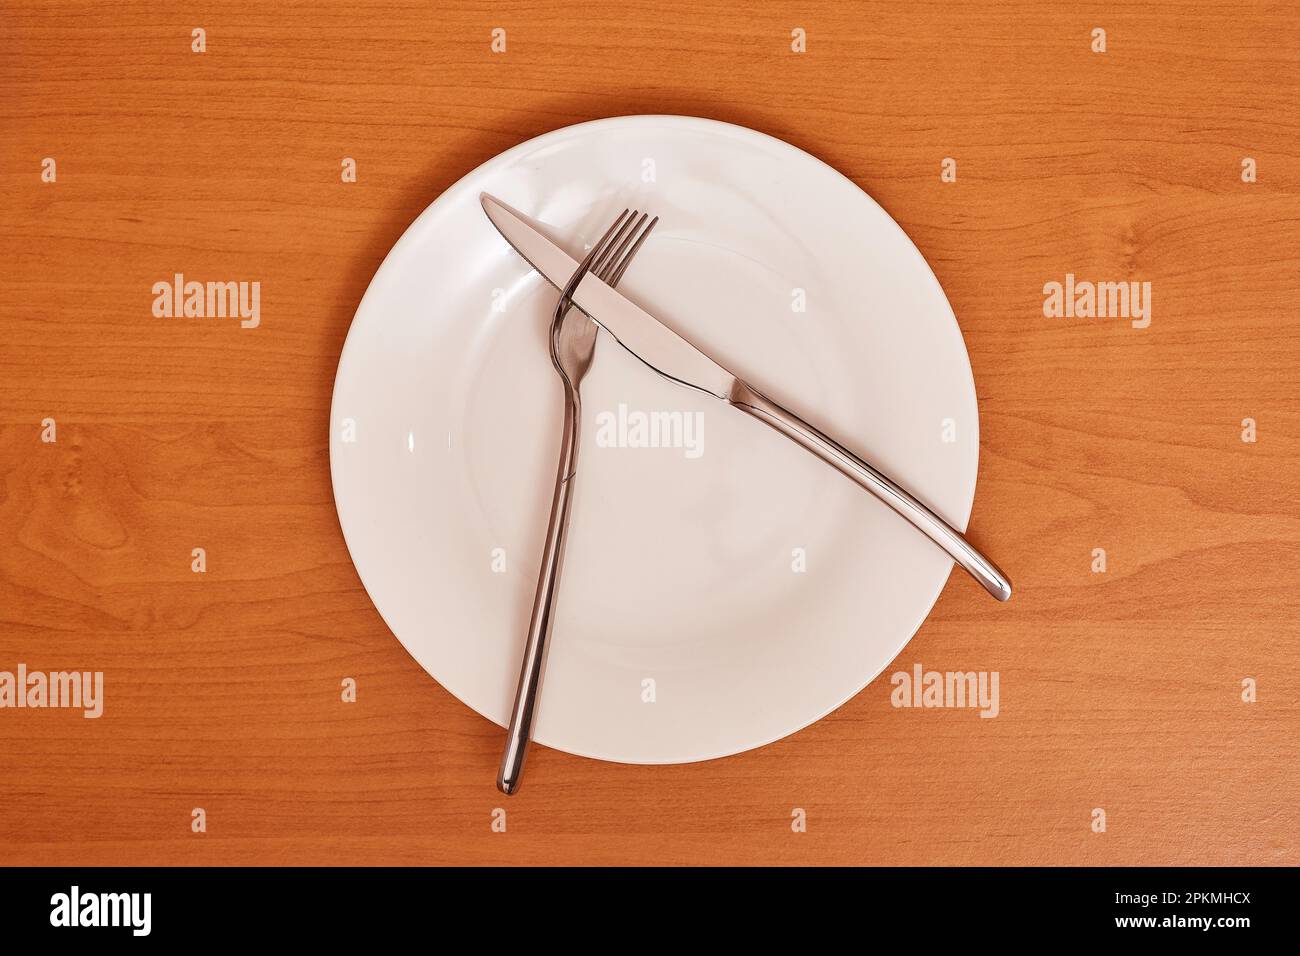 A signal 'Didn't like the dish'. Empty and clean blue plate with fork and knife on a wooden table as an example of table etiquette Stock Photo